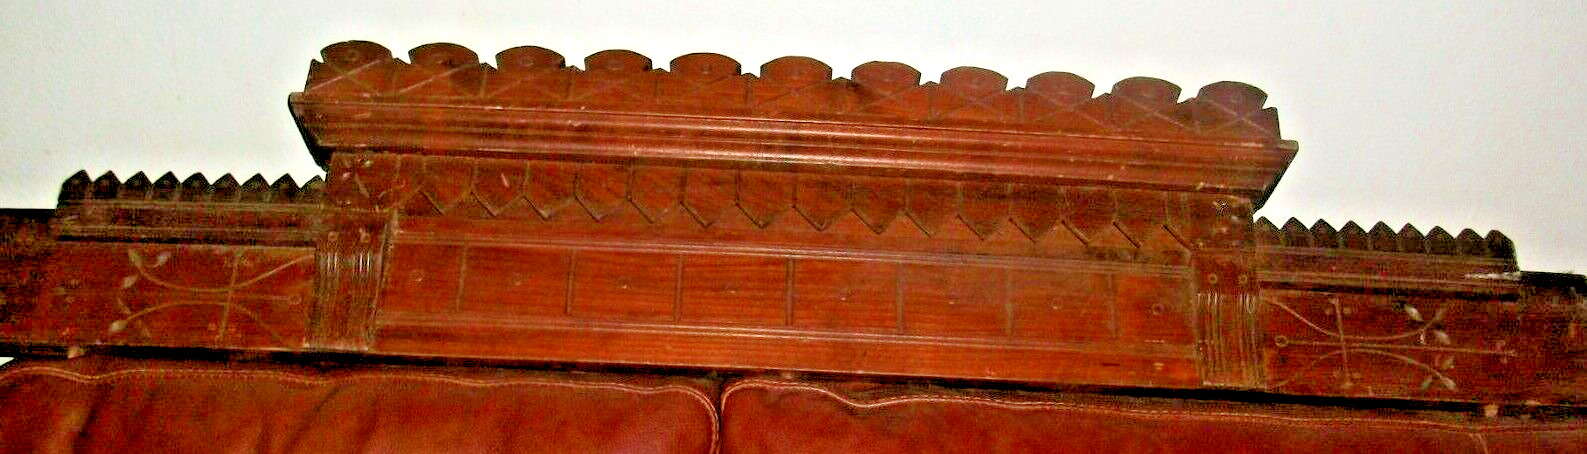 Decorative OLD Wooden Bed, Doorway or Hall Décor-Unusual and Ornate-LQQK